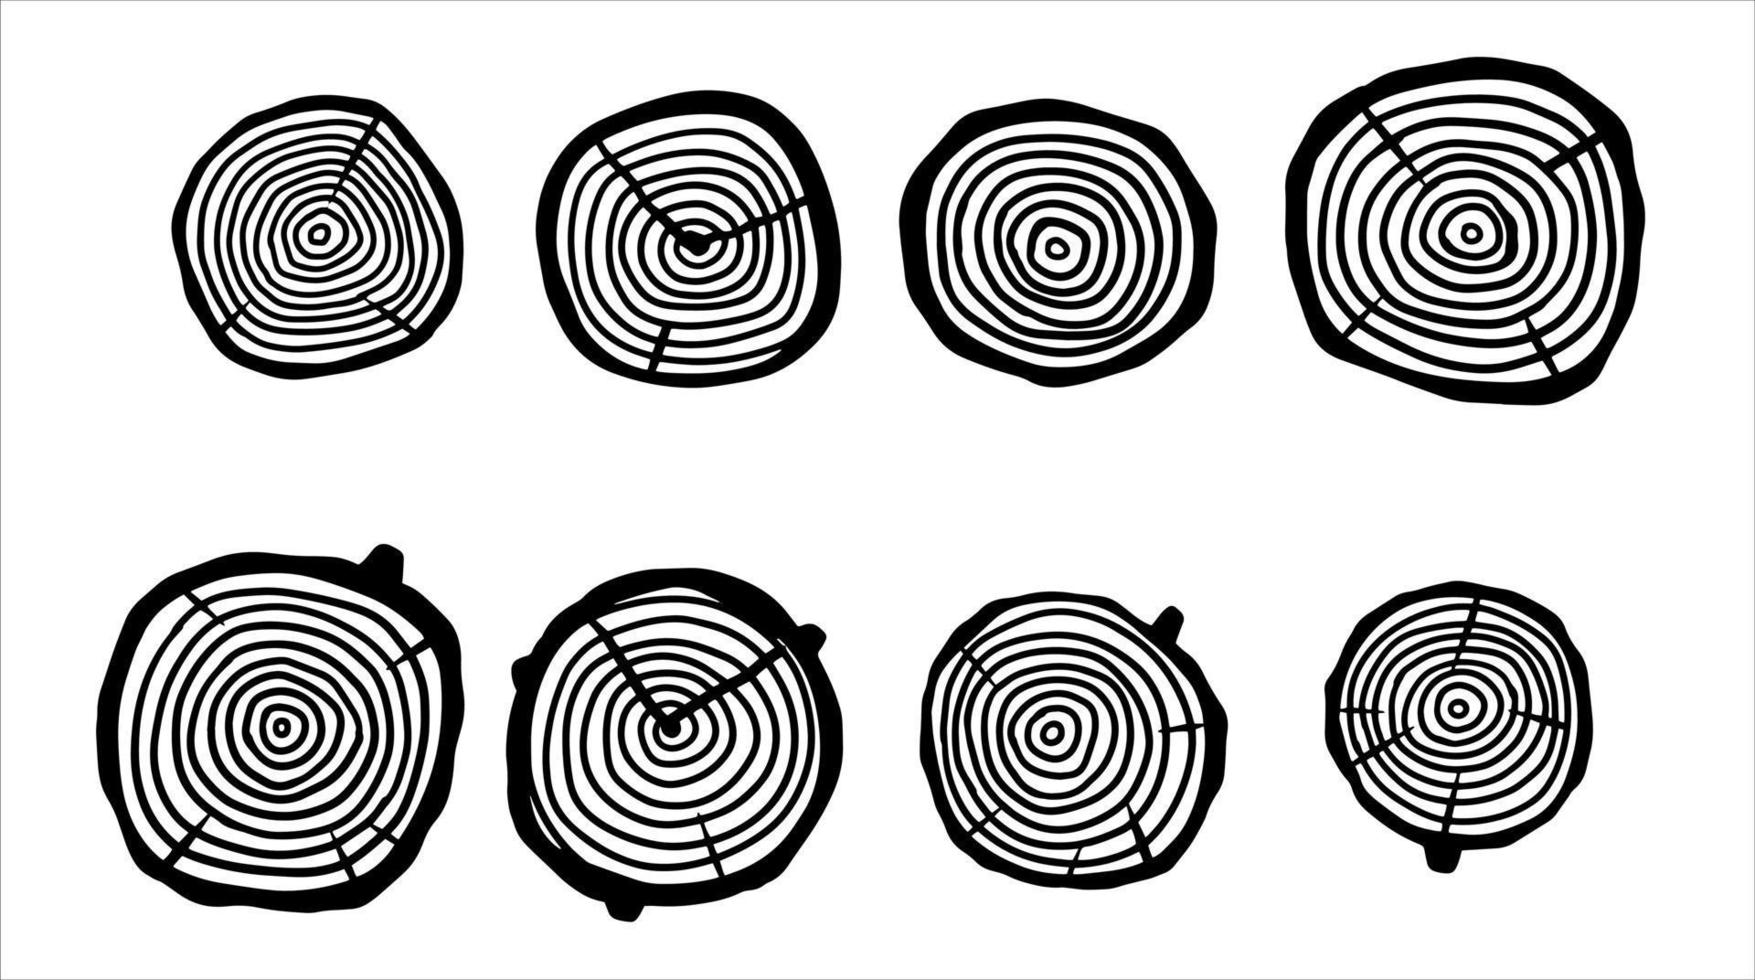 Cut tree trunk. Stump cross section. Concentric circular pattern on brown wood. Logger and Woodworking Industry Icon vector